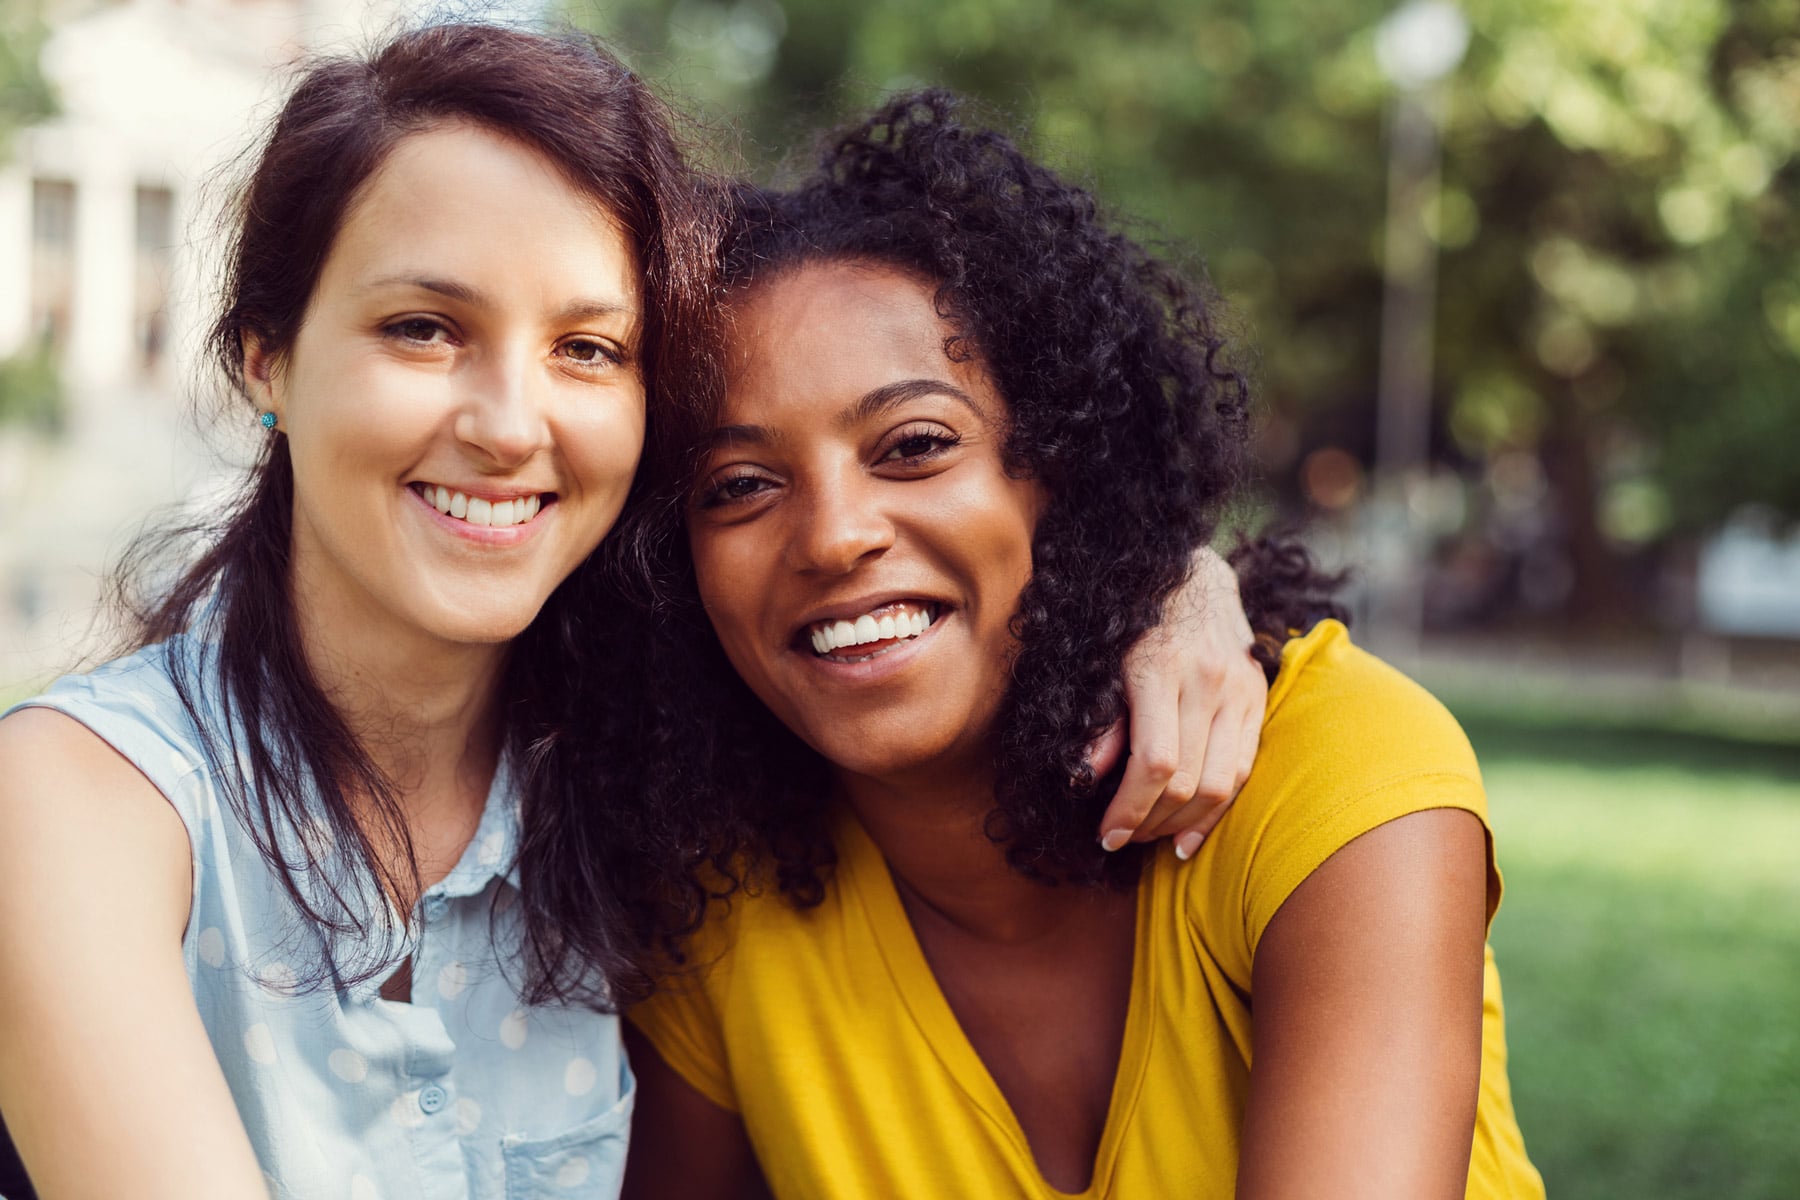 smiling white woman embracing and wrapping arm around smiling black woman